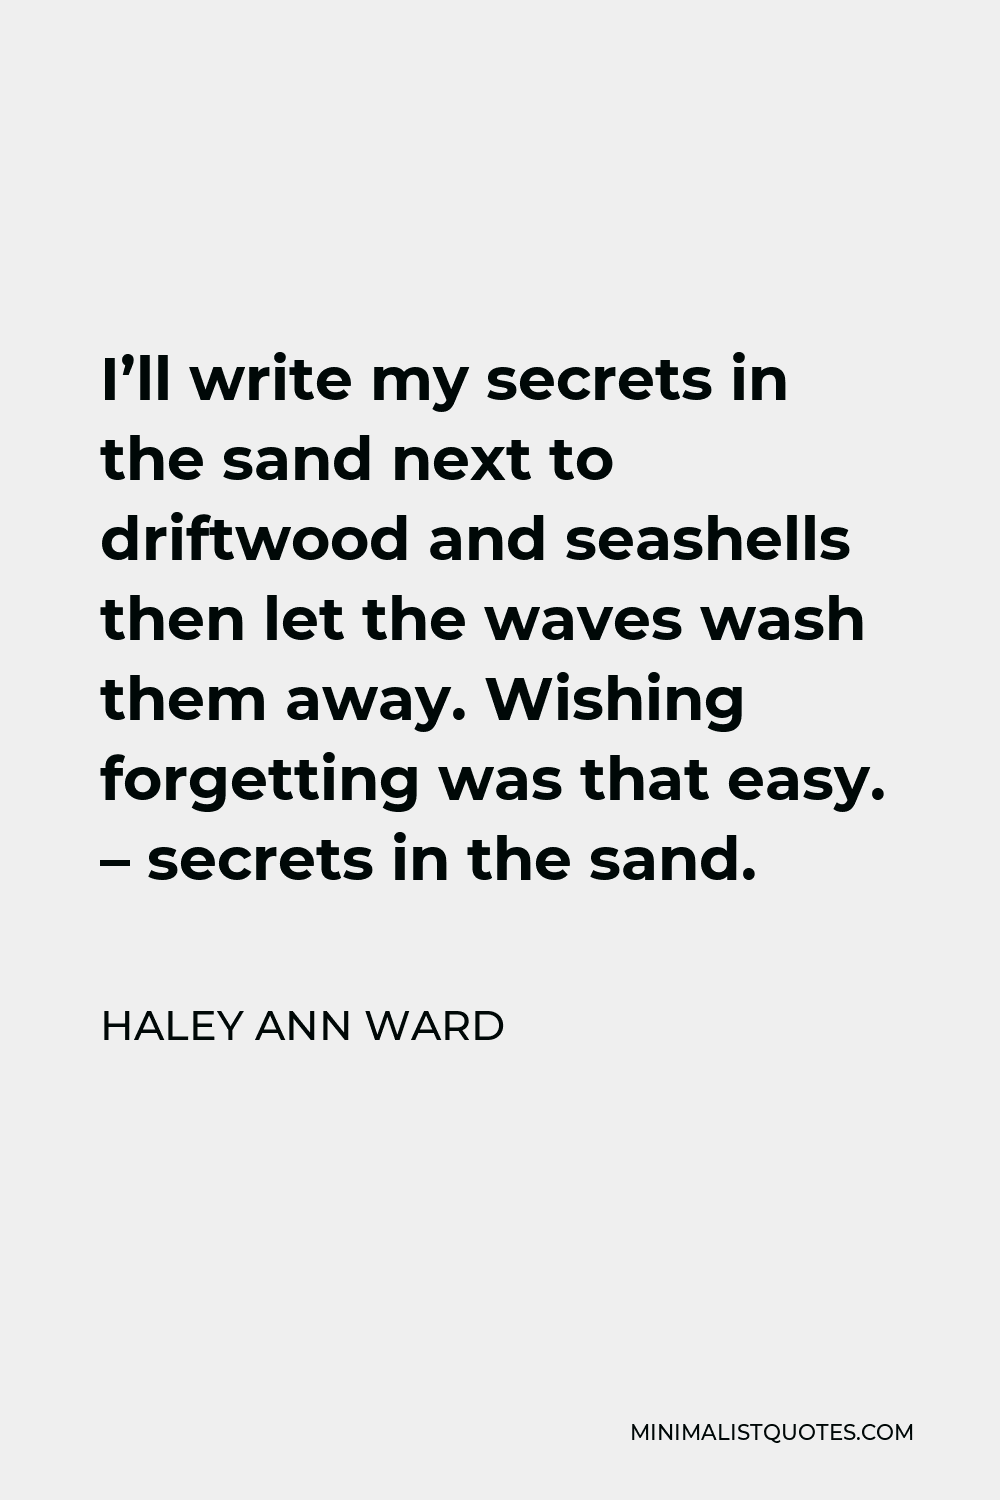 Haley Ann Ward Quote - I’ll write my secrets in the sand next to driftwood and seashells then let the waves wash them away. Wishing forgetting was that easy. – secrets in the sand.